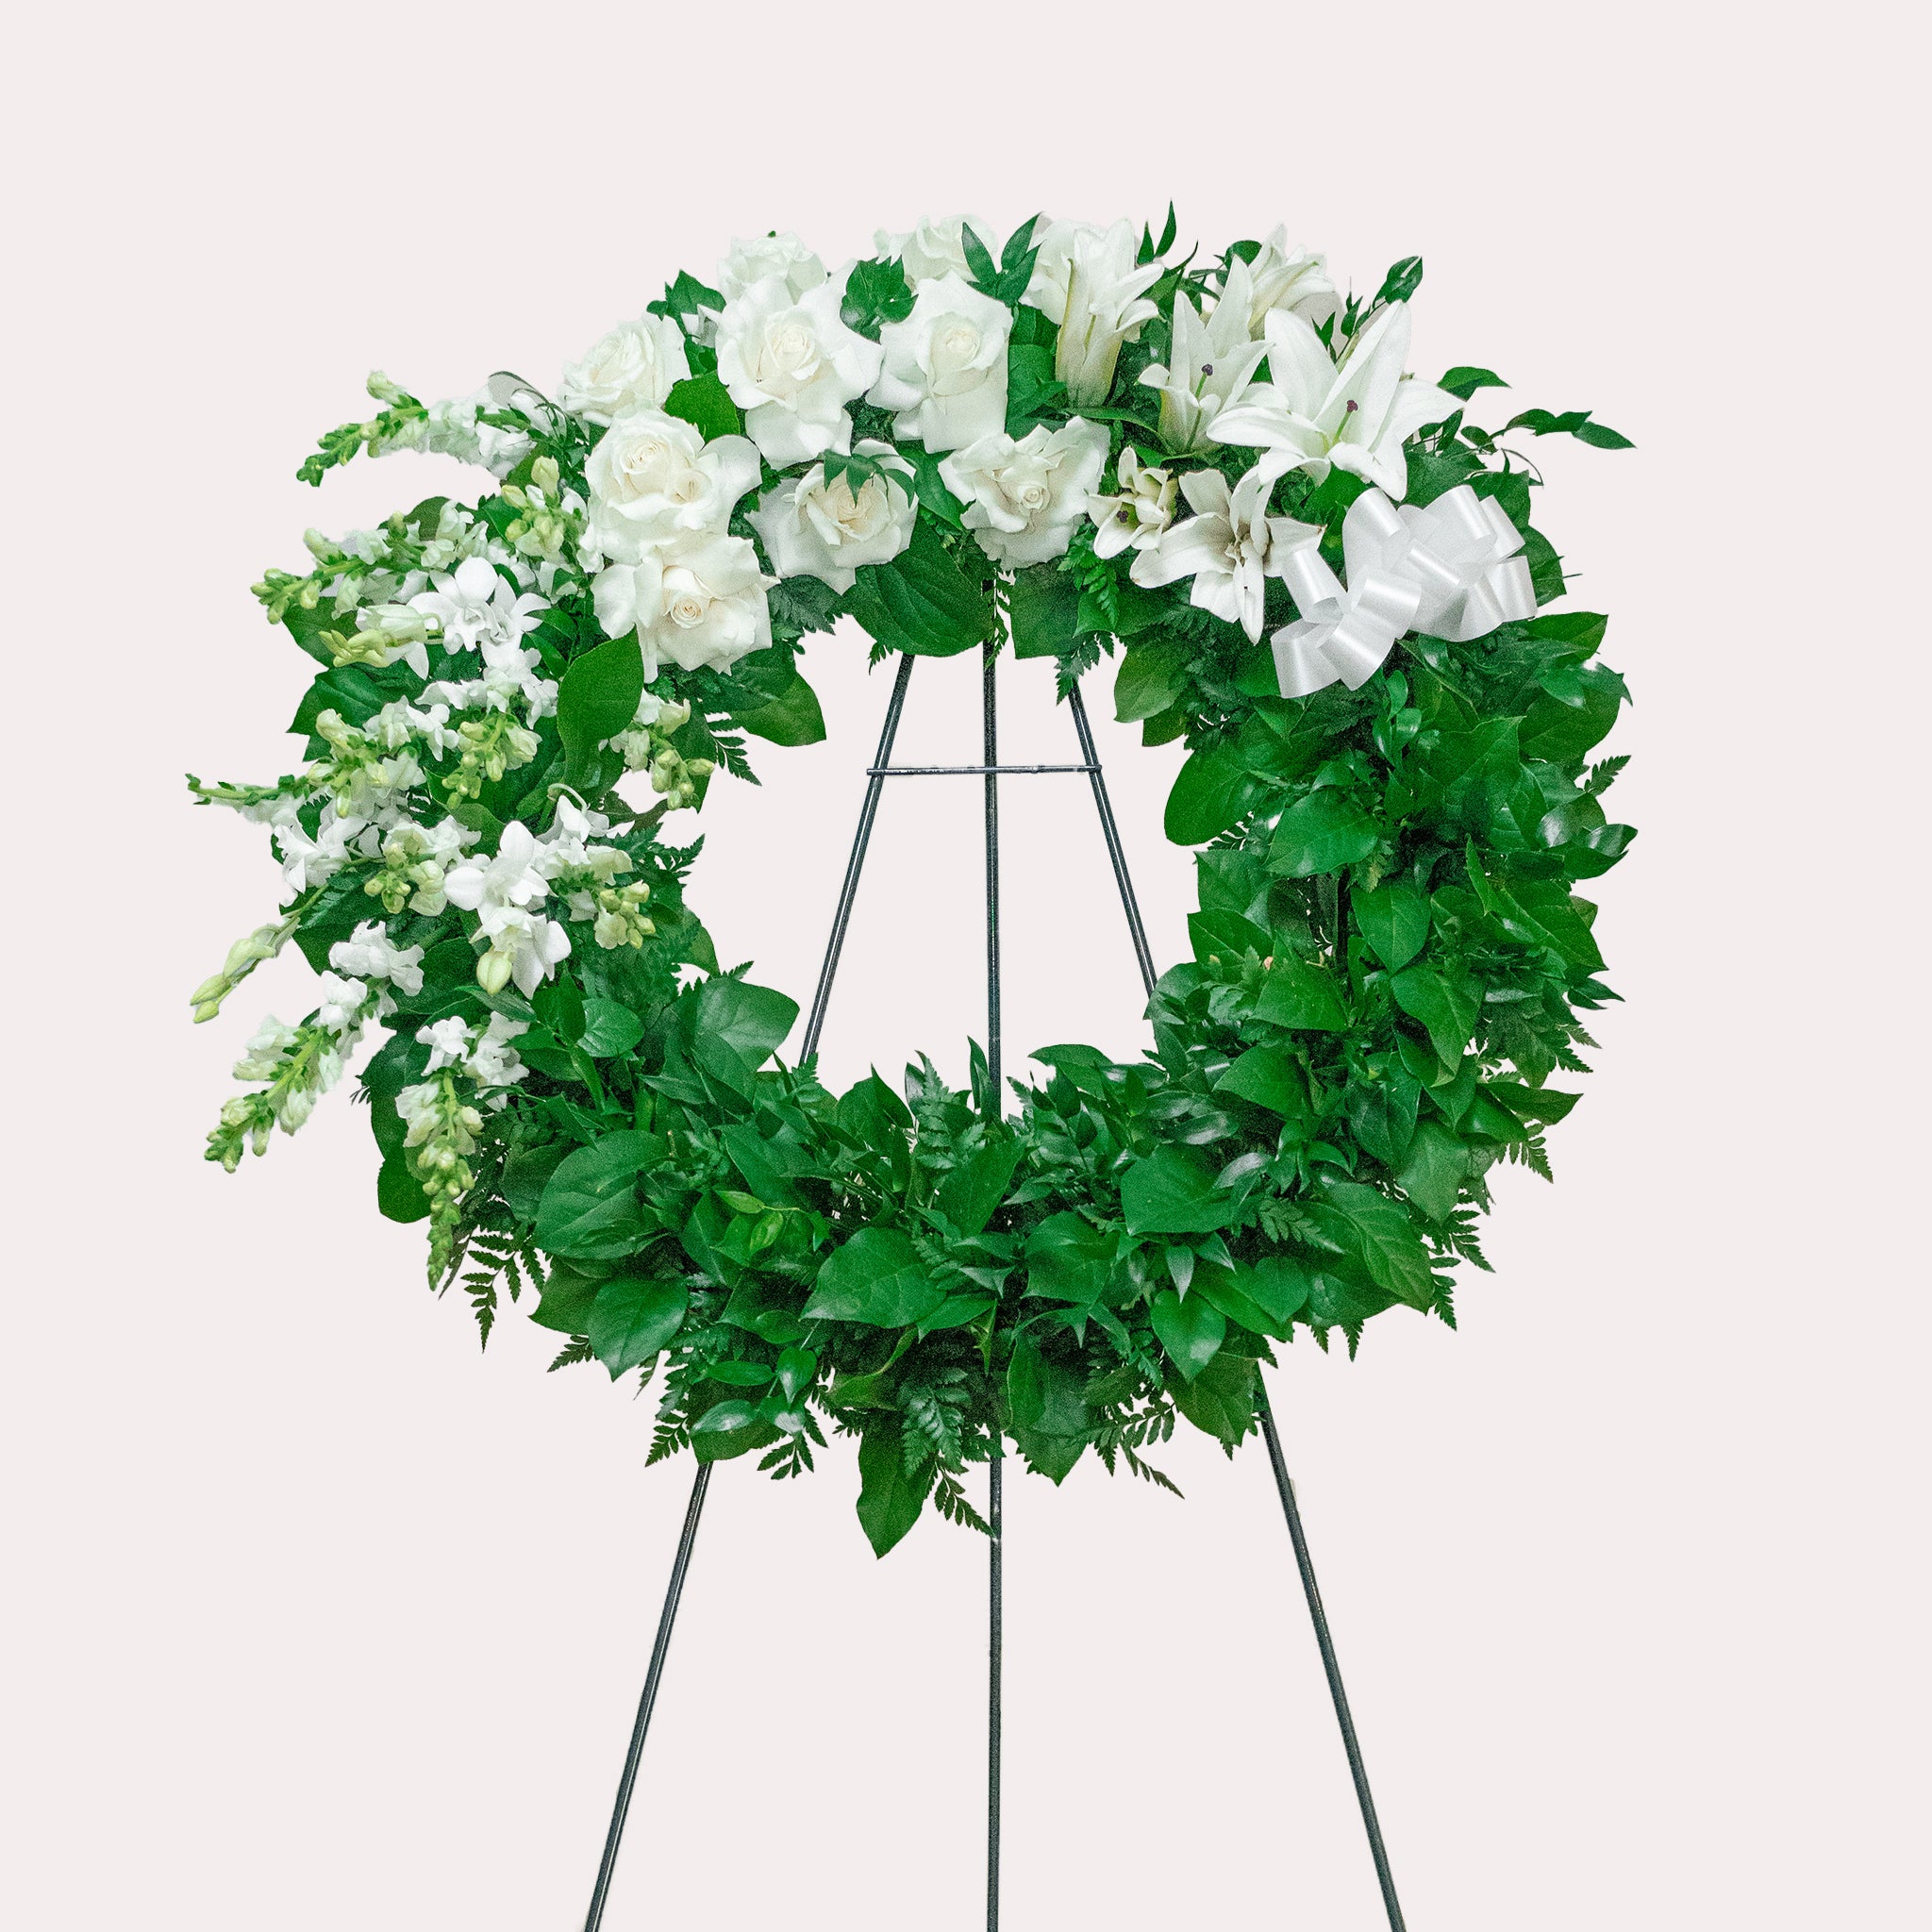 a sympathy wreath of all white and lush greens